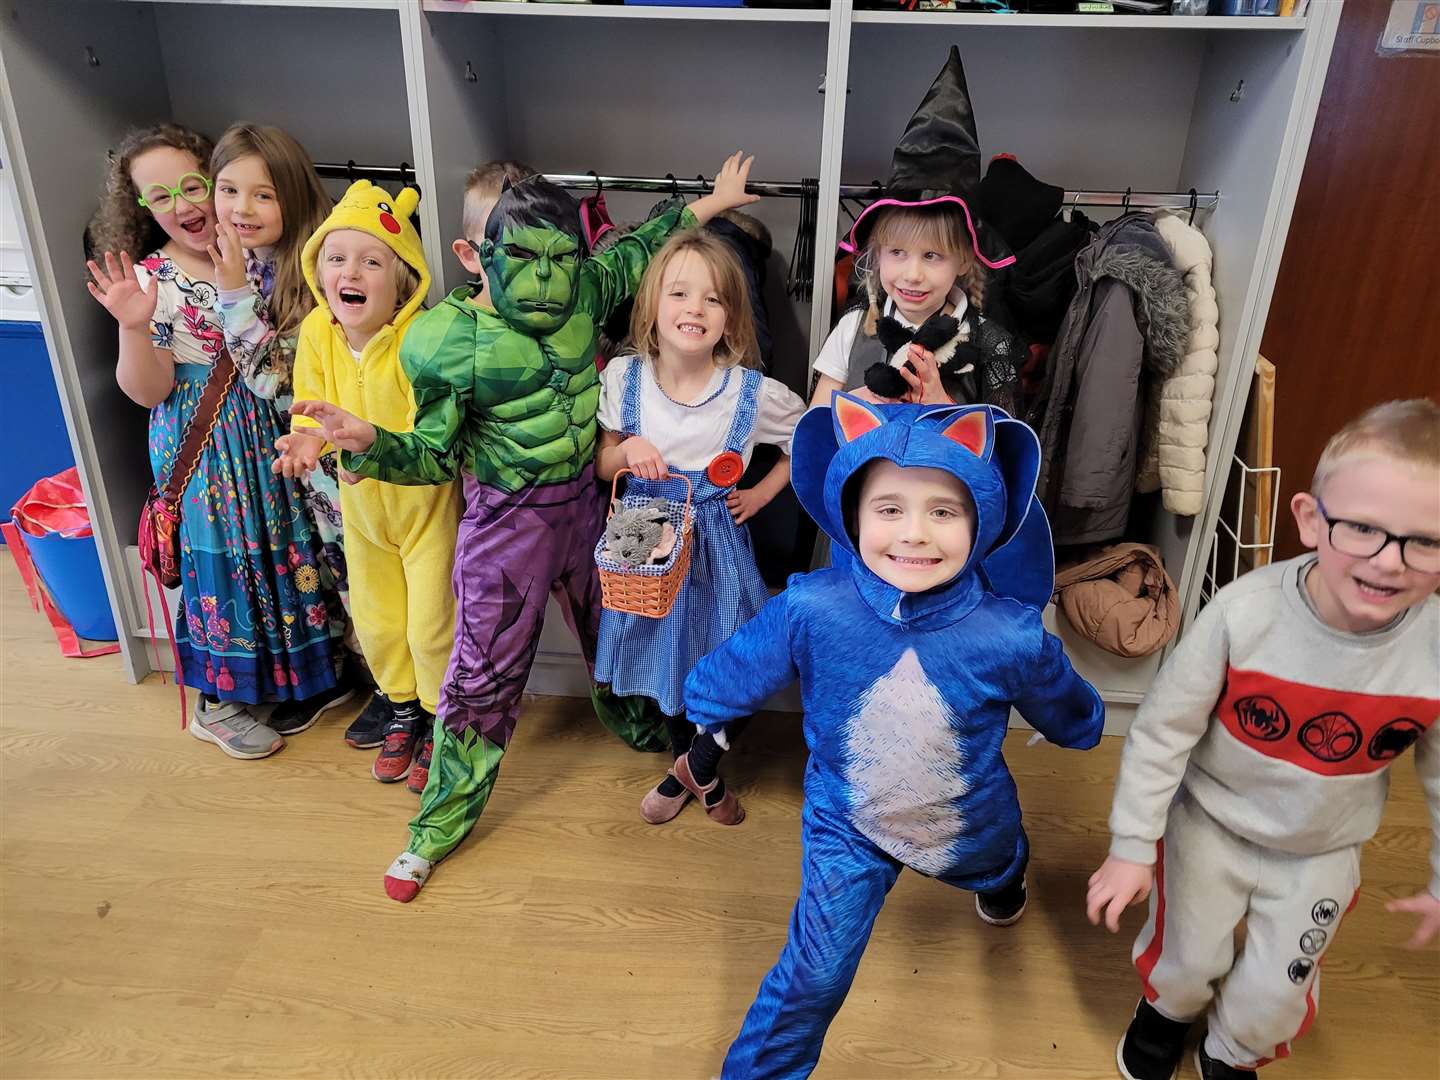 The pupils appeared in an array of costumes to celebrate the event.